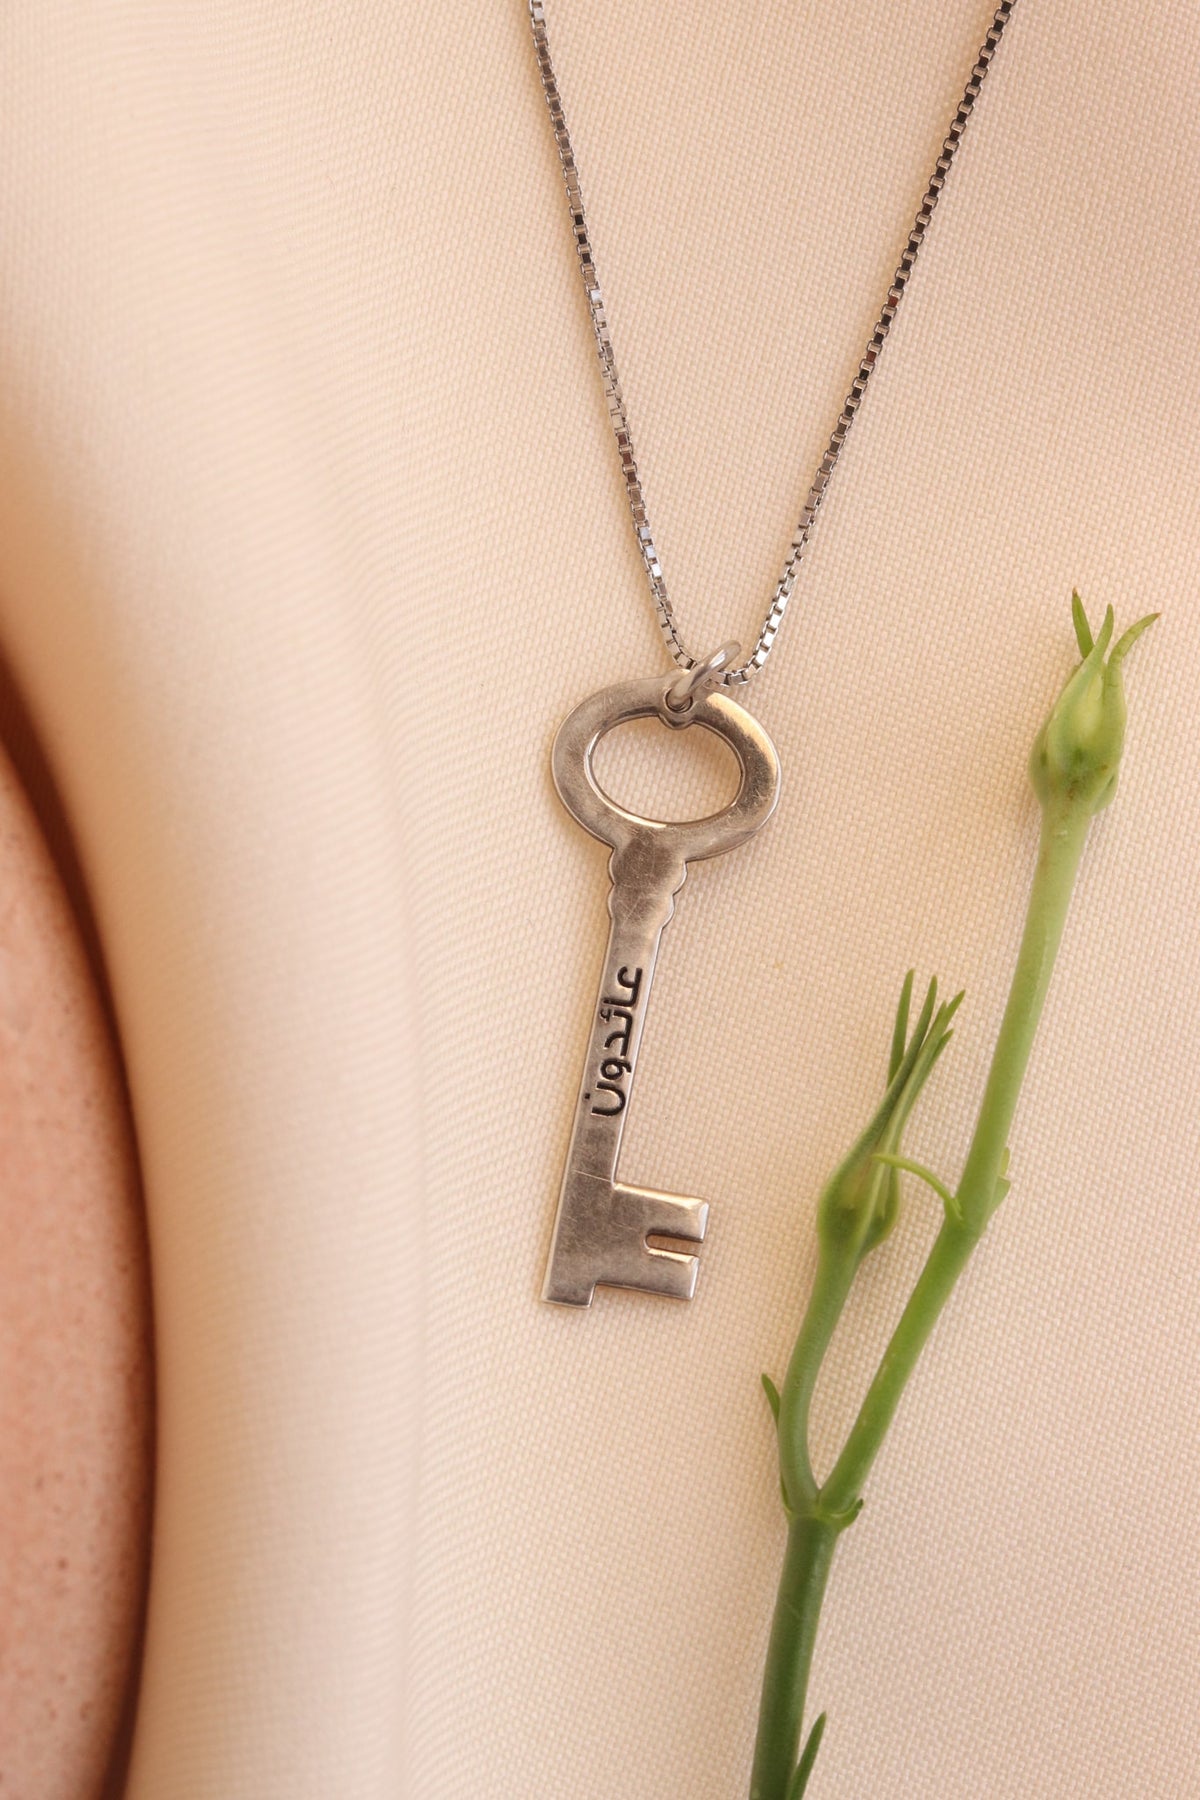 Palestinian right of return key necklace